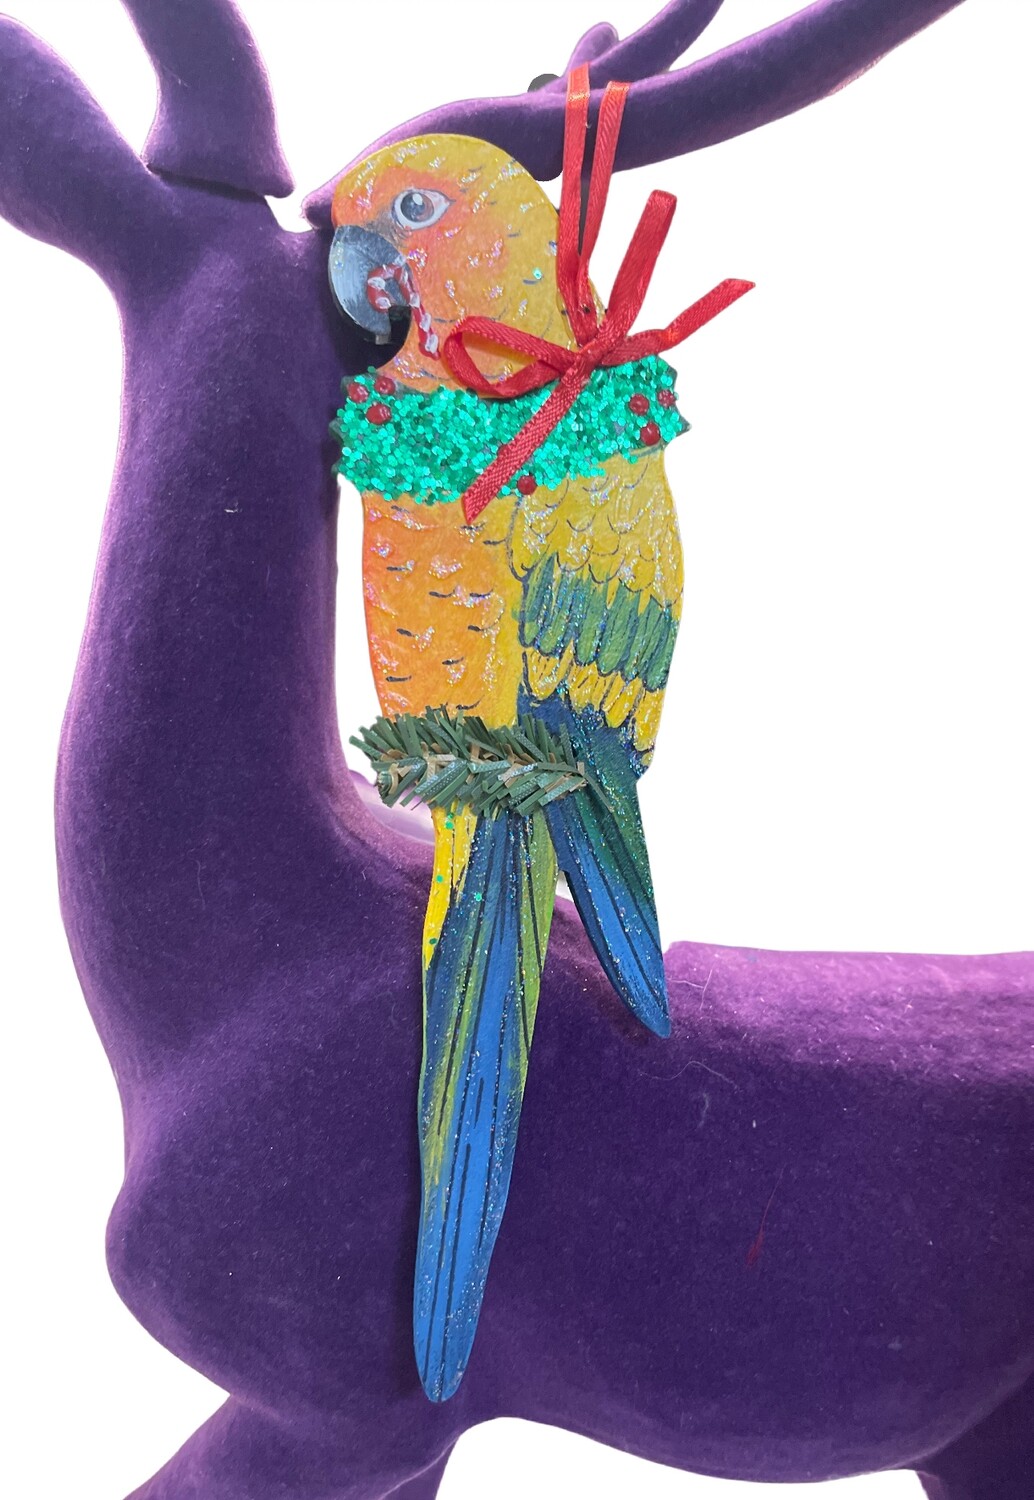 Sun Conure - Handmade and Painted Glitter Ornaments!